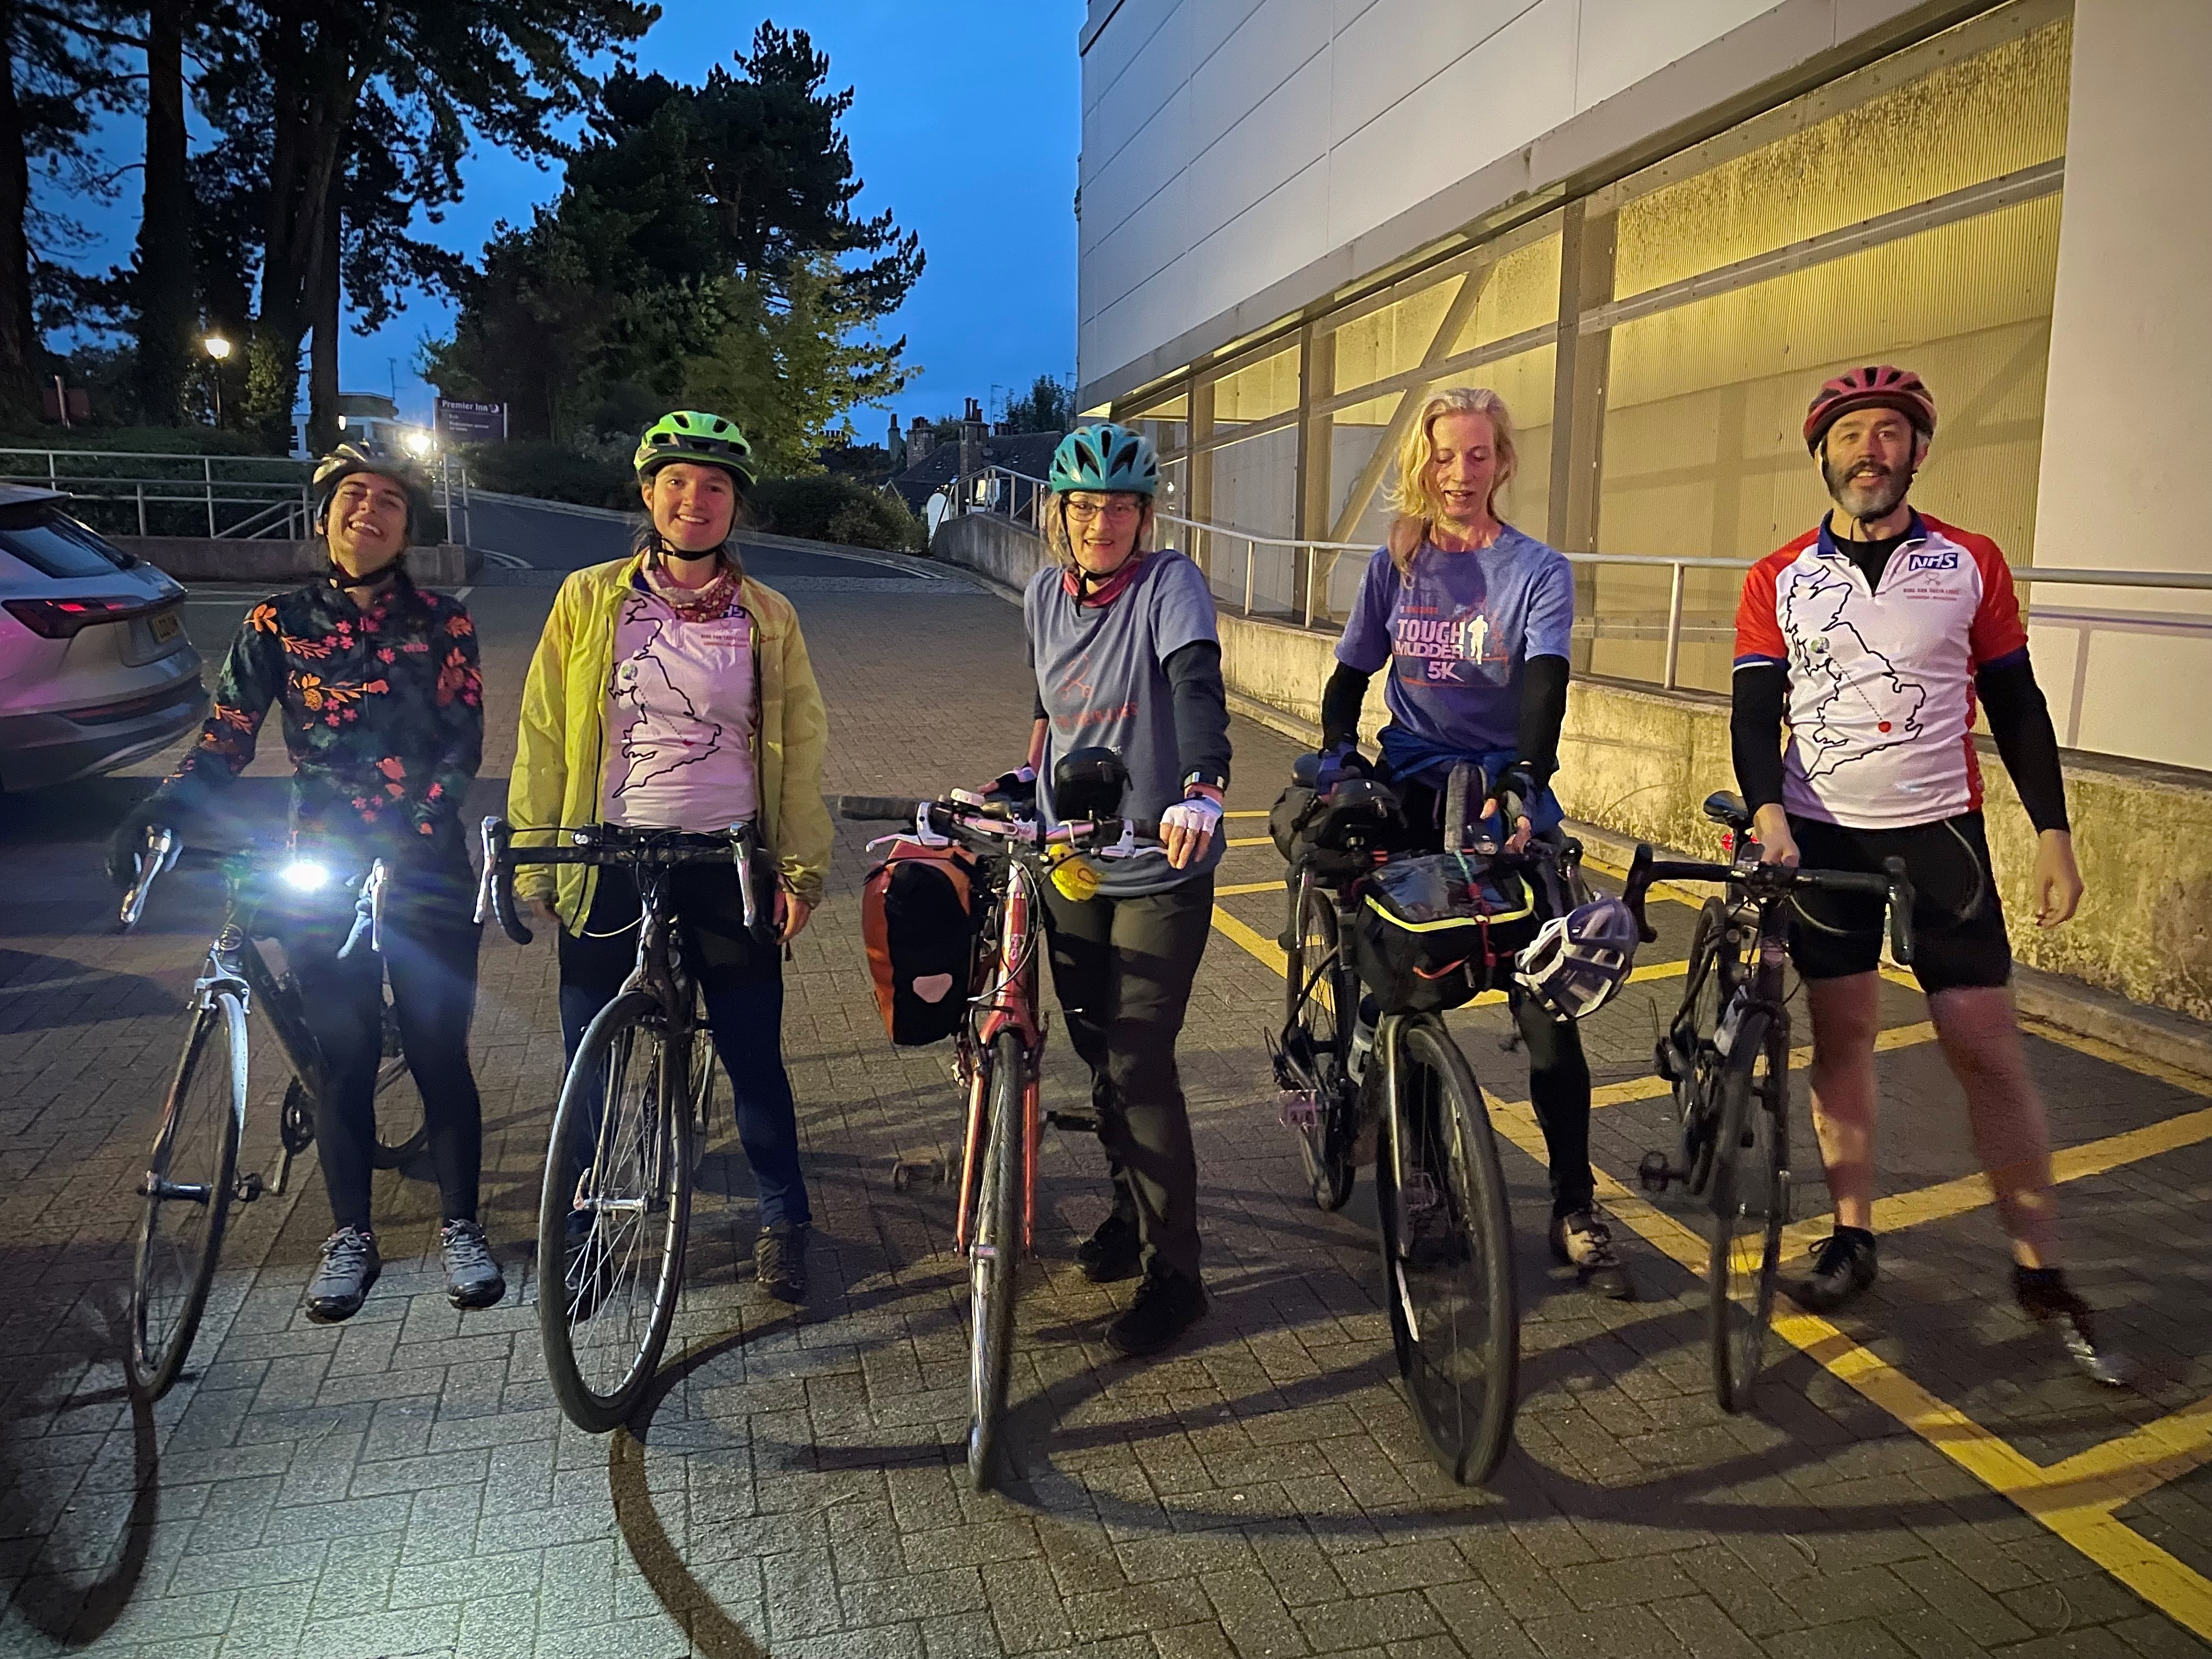 Catriona Mellor and the group on their bikes in Harrogate